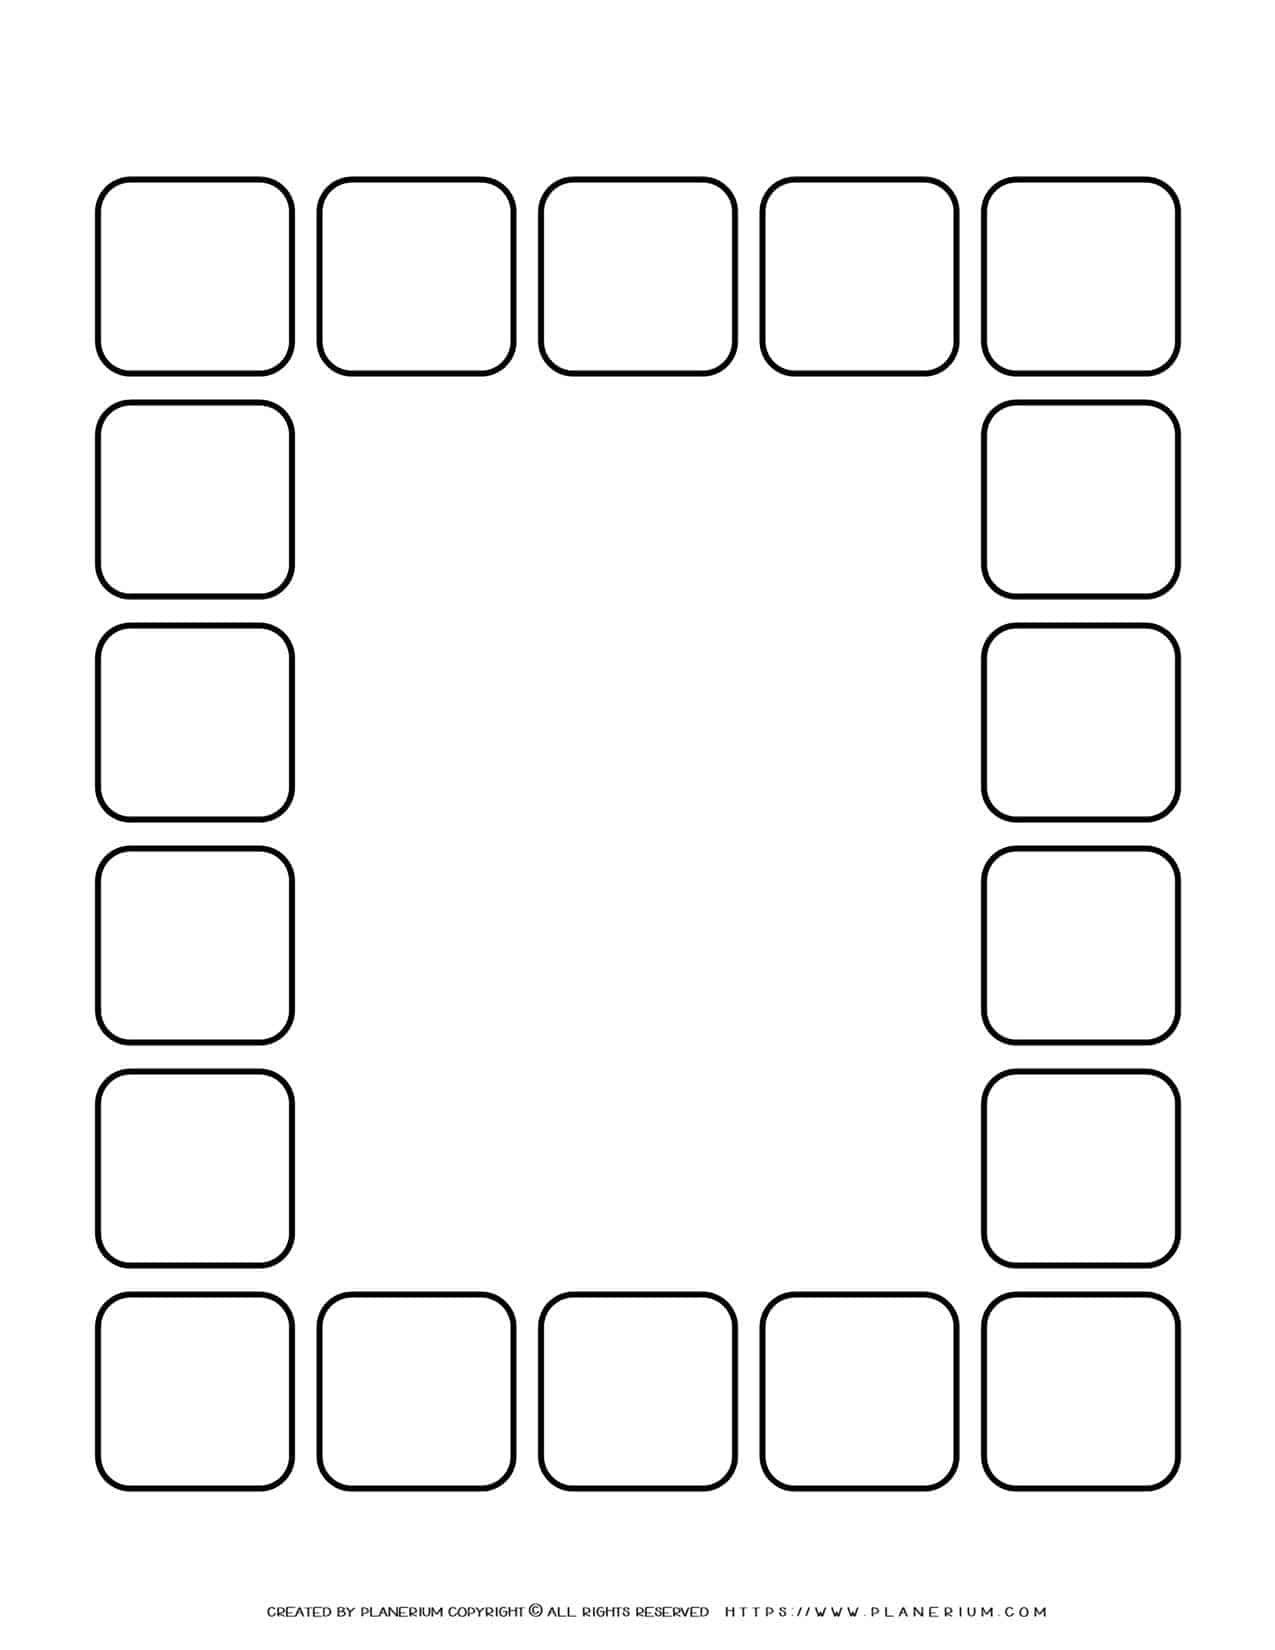 Sequence Chart Template - Four Squares on a Small Circle